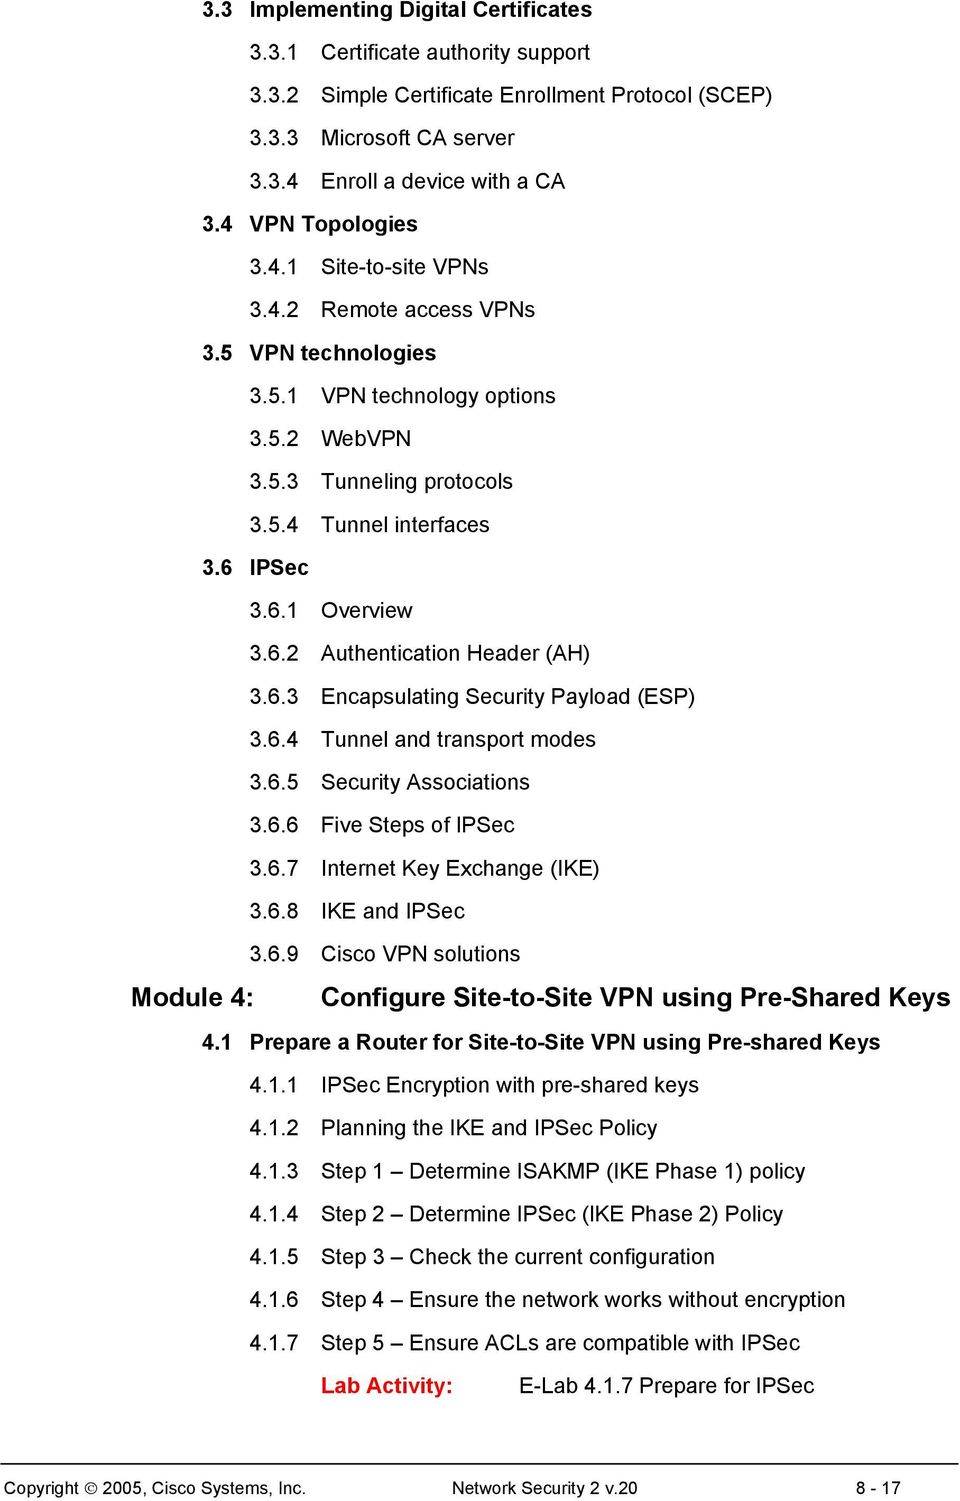 6.2 Authentication Header (AH) 3.6.3 Encapsulating Security Payload (ESP) 3.6.4 Tunnel and transport modes 3.6.5 Security Associations 3.6.6 Five Steps of IPSec 3.6.7 Internet Key Exchange (IKE) 3.6.8 IKE and IPSec 3.